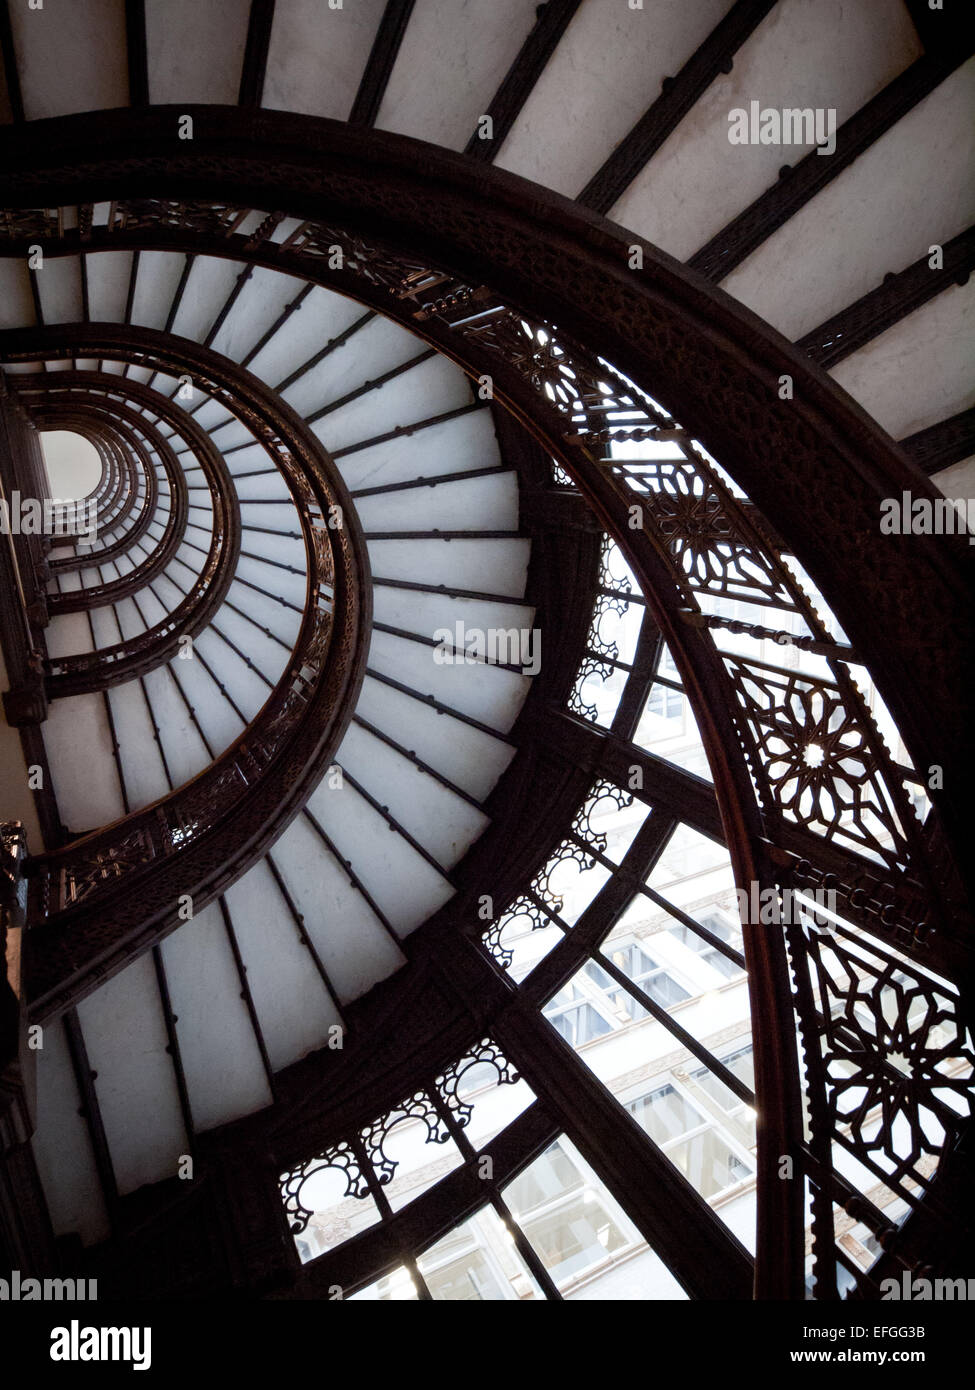 The brilliant oriel staircase at The Rookery, one of the most historically significant buildings in Chicago, Illinois. Stock Photo